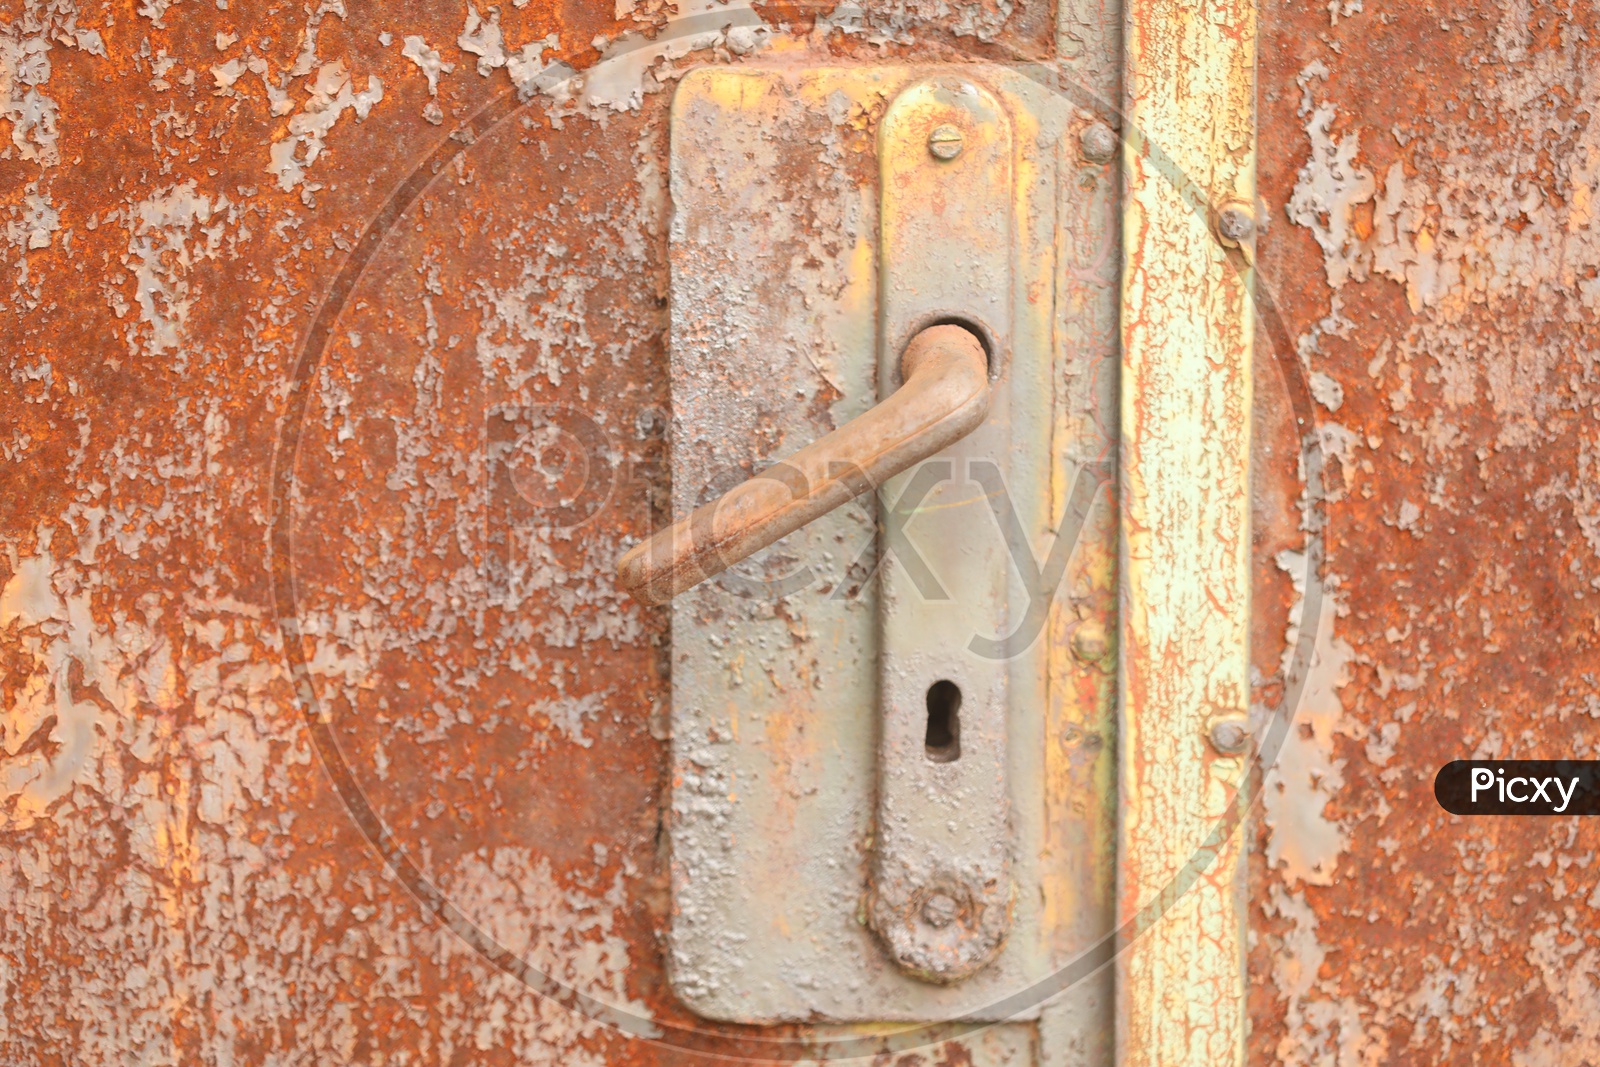 A rusted door with a handle